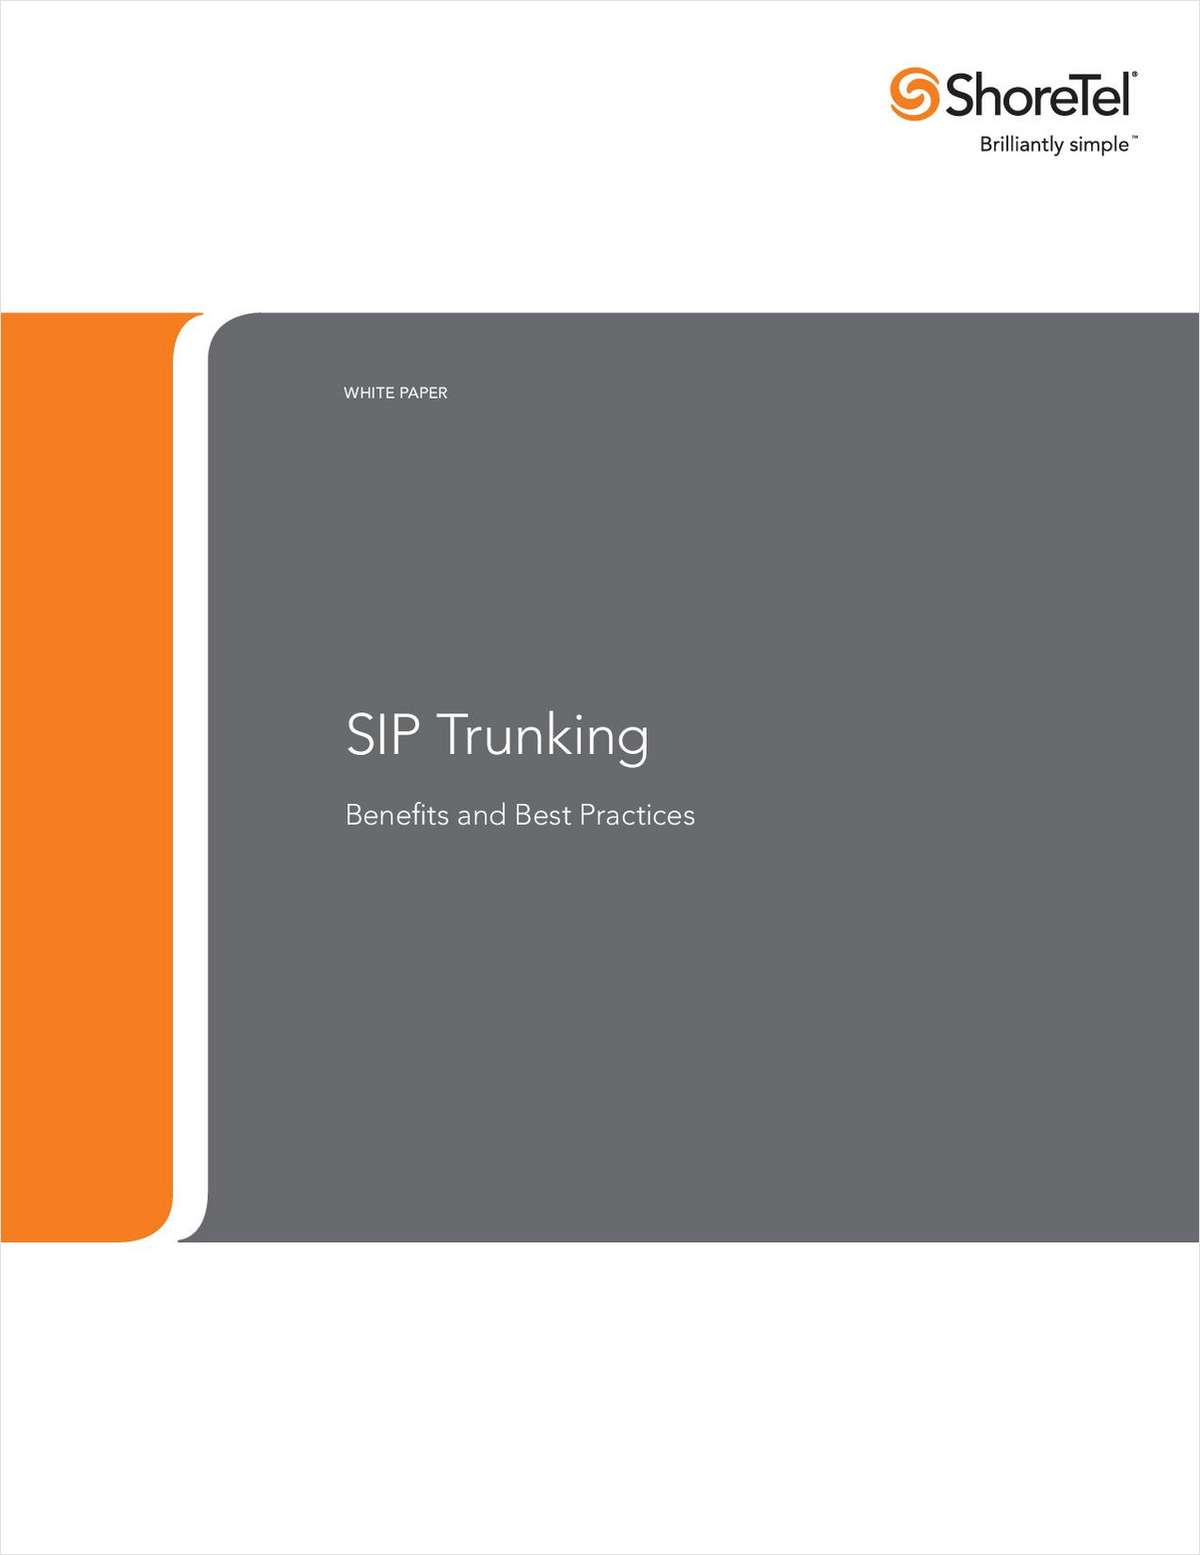 SIP Trunks - Benefits and Best Practices